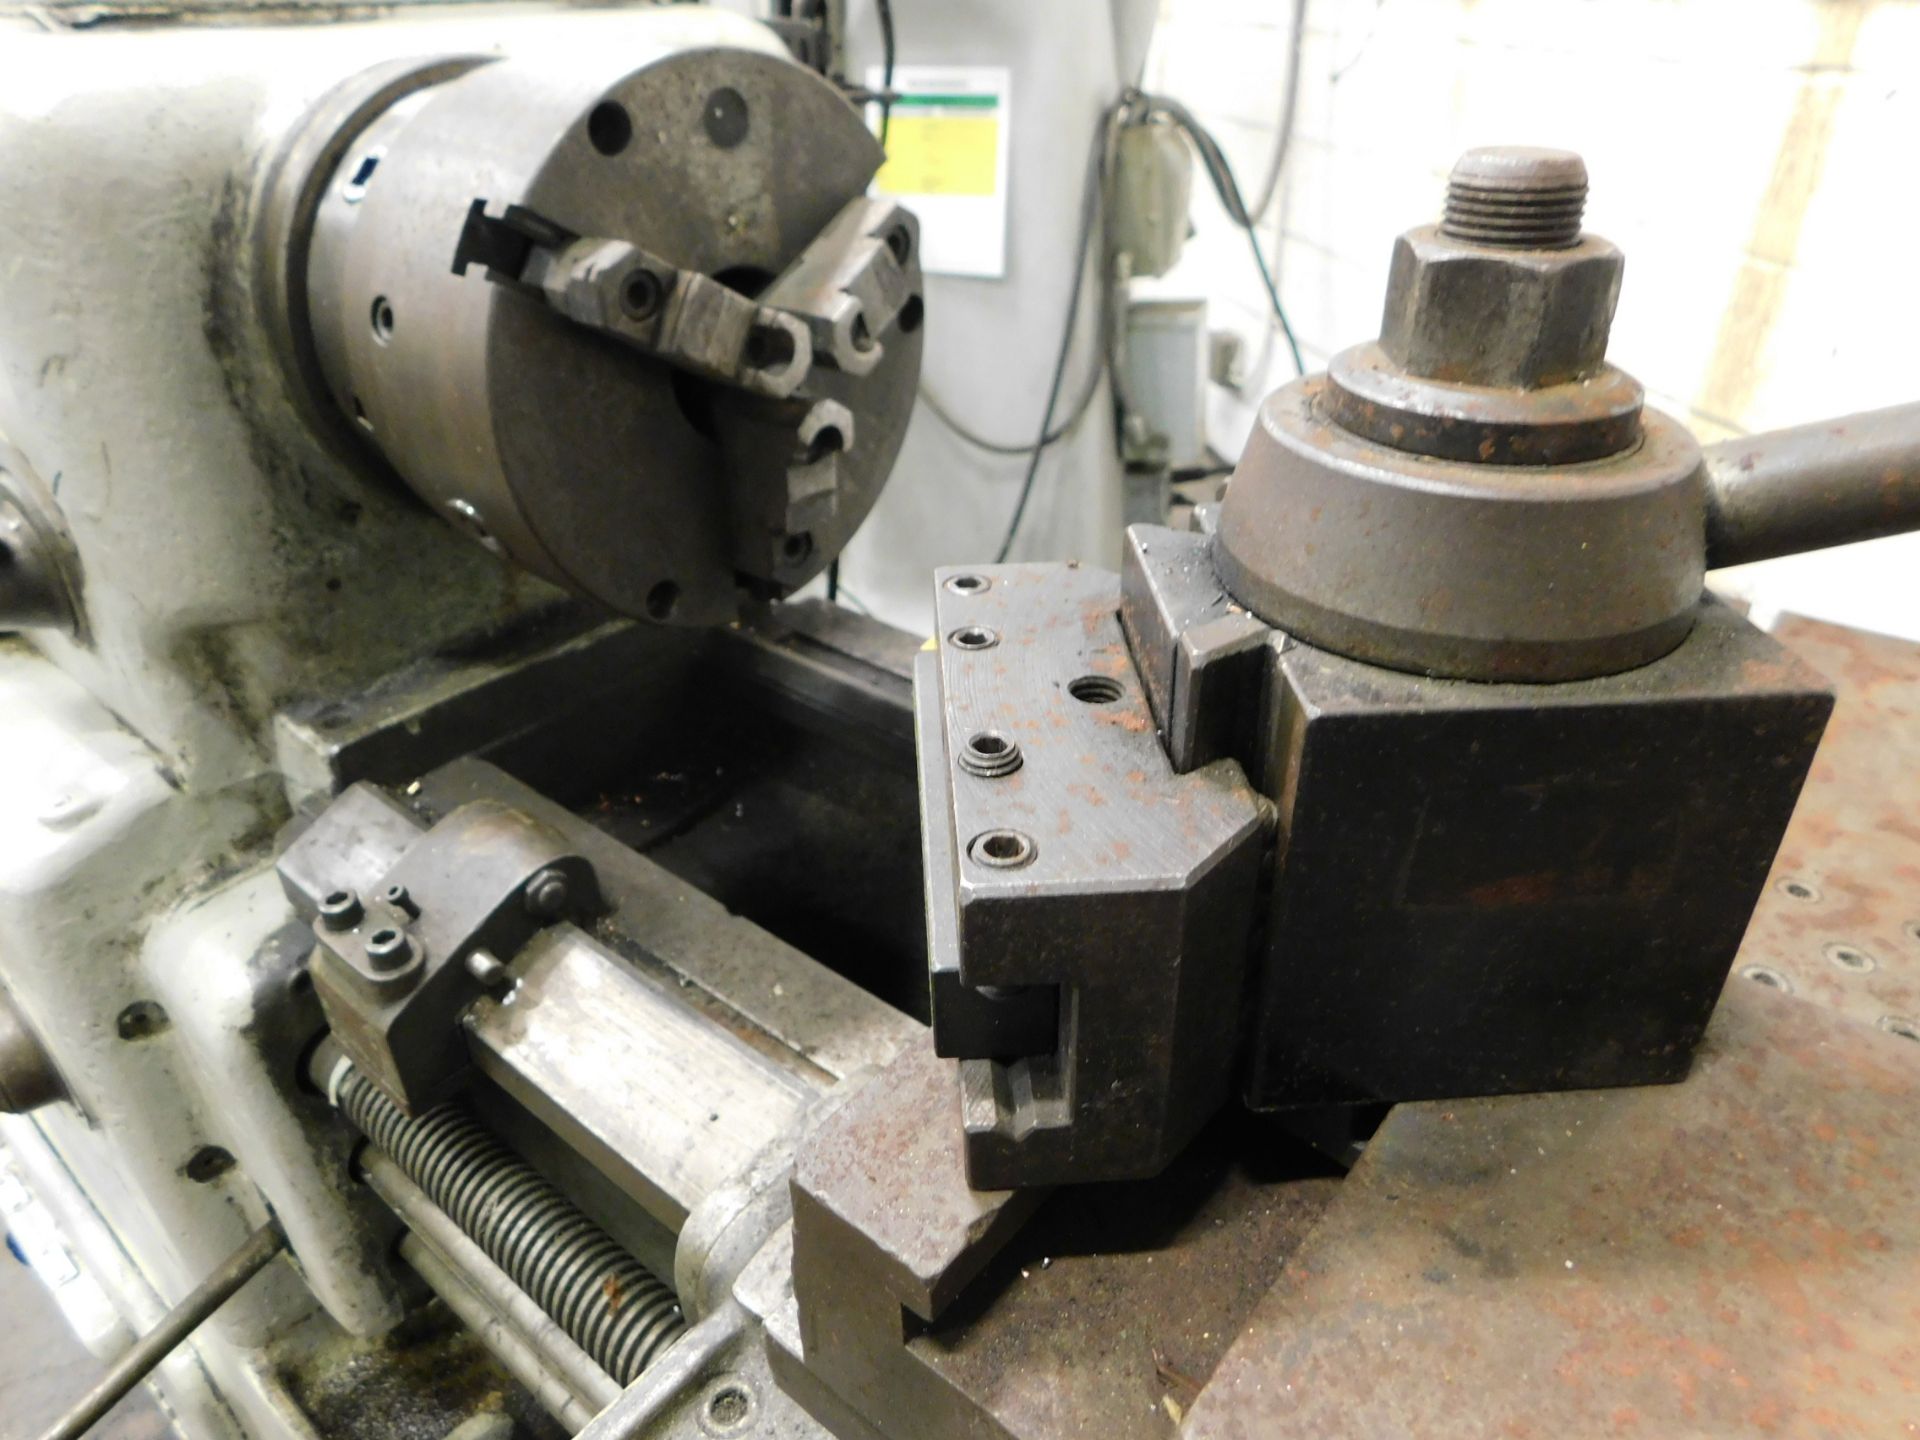 Lansing 16 In. X 48 In. Tool Room Lathe, Geared Head, 8 In 3-Jaw Chuck, Hardinge Spindle Nose Collet - Image 6 of 16